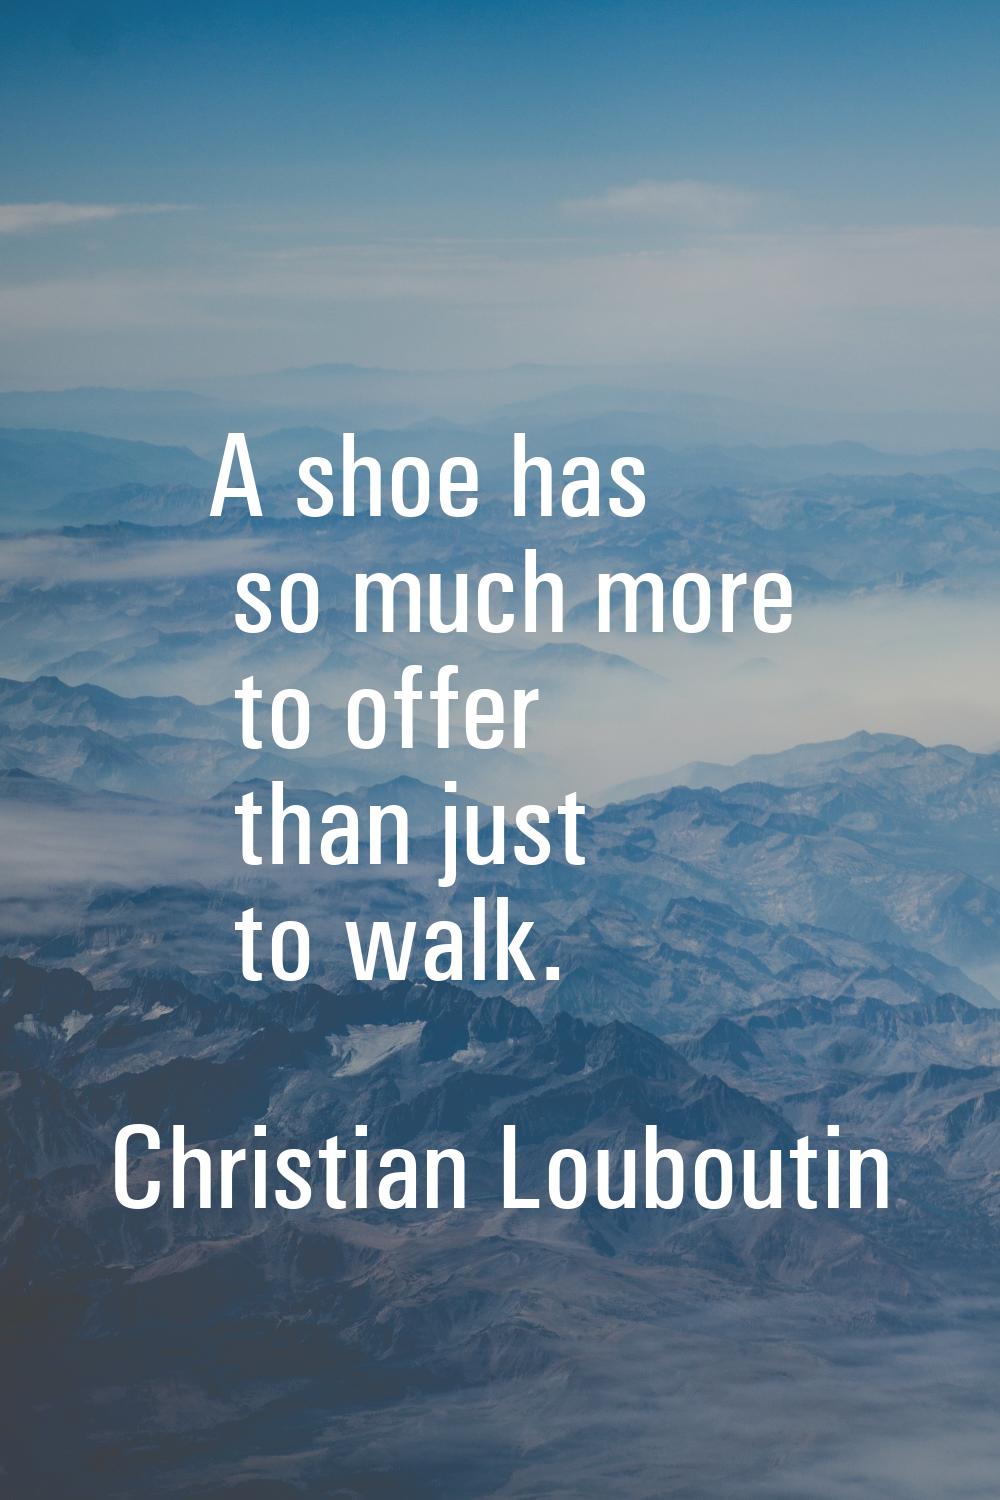 A shoe has so much more to offer than just to walk.